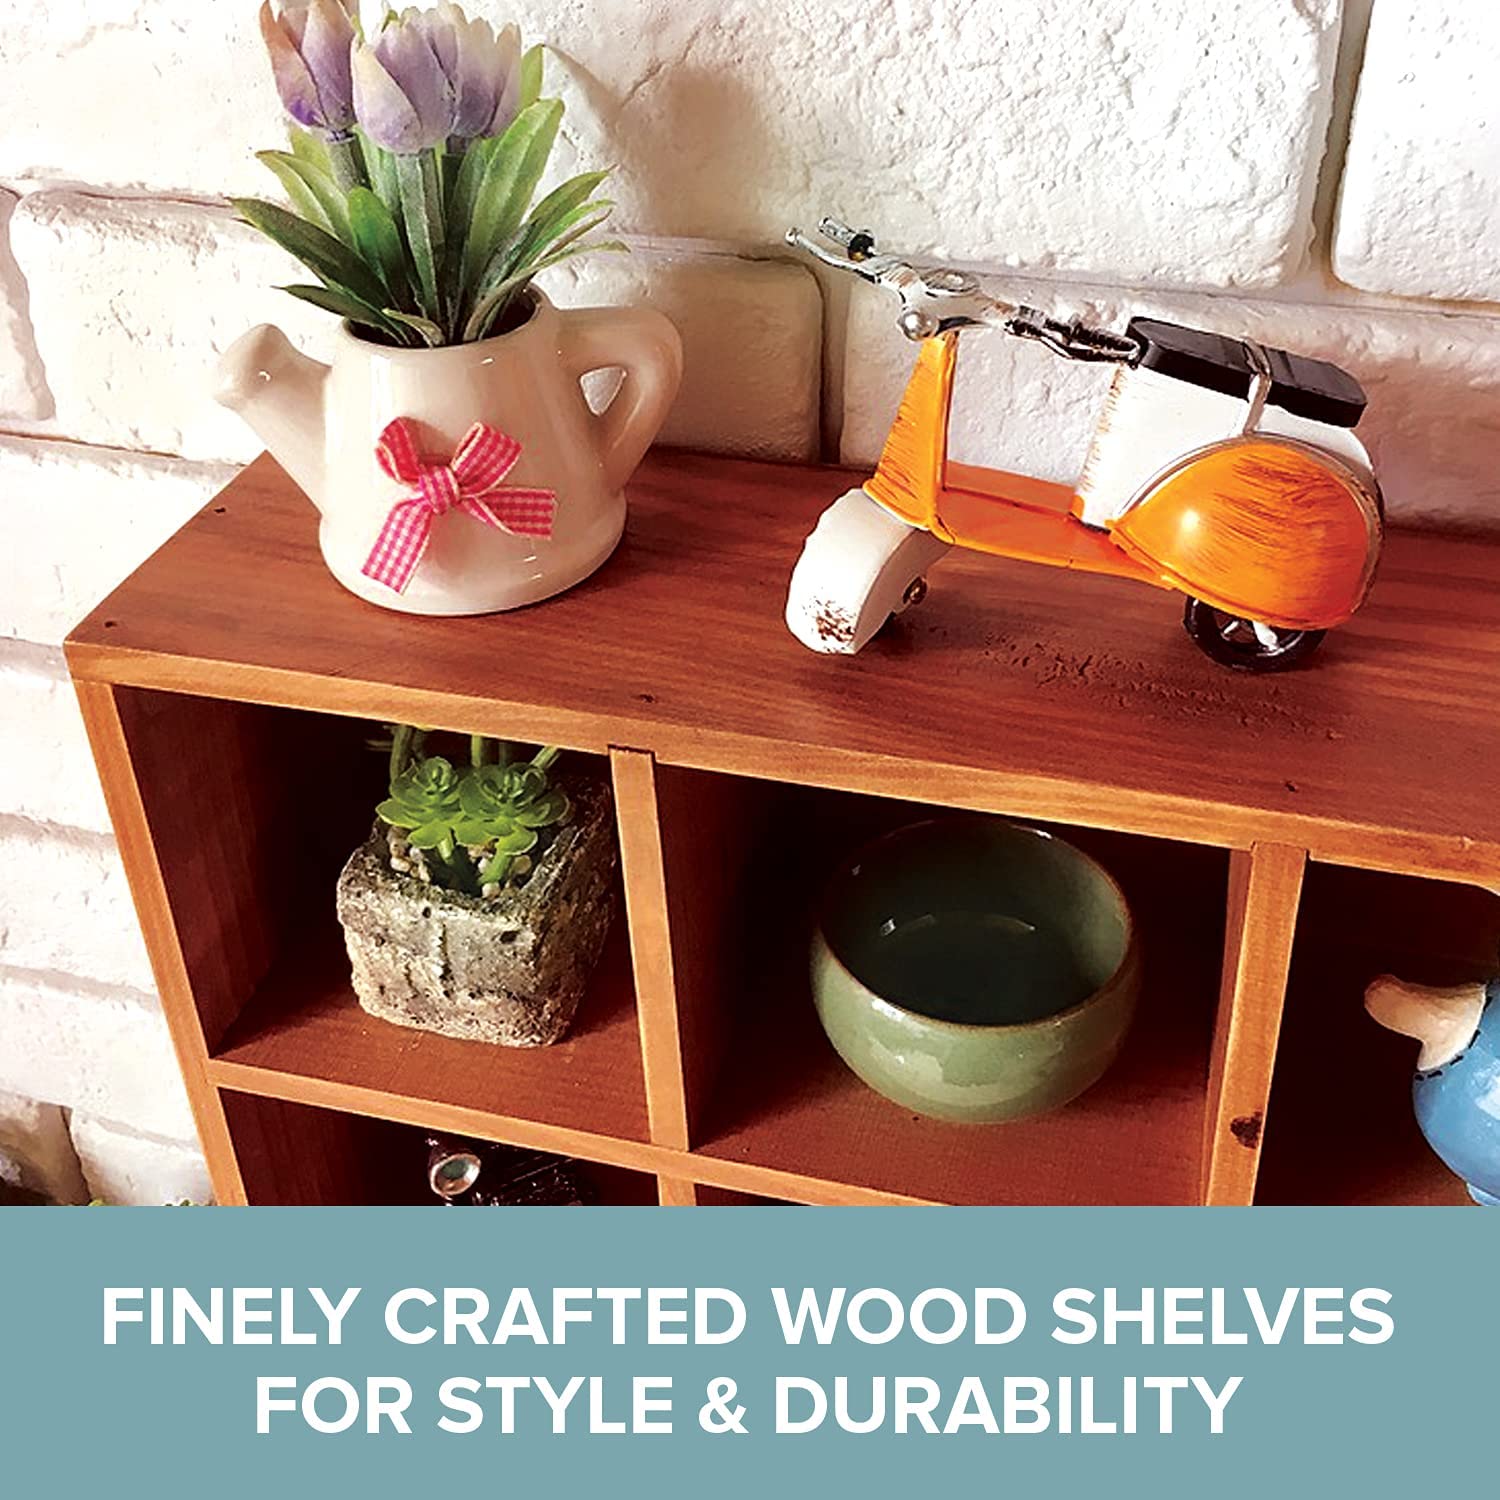 Load image into Gallery viewer, Wall Mount Wood Cabinet Top Cubbies | Rustic Floating Shelves for Storage Shelf with Drawers